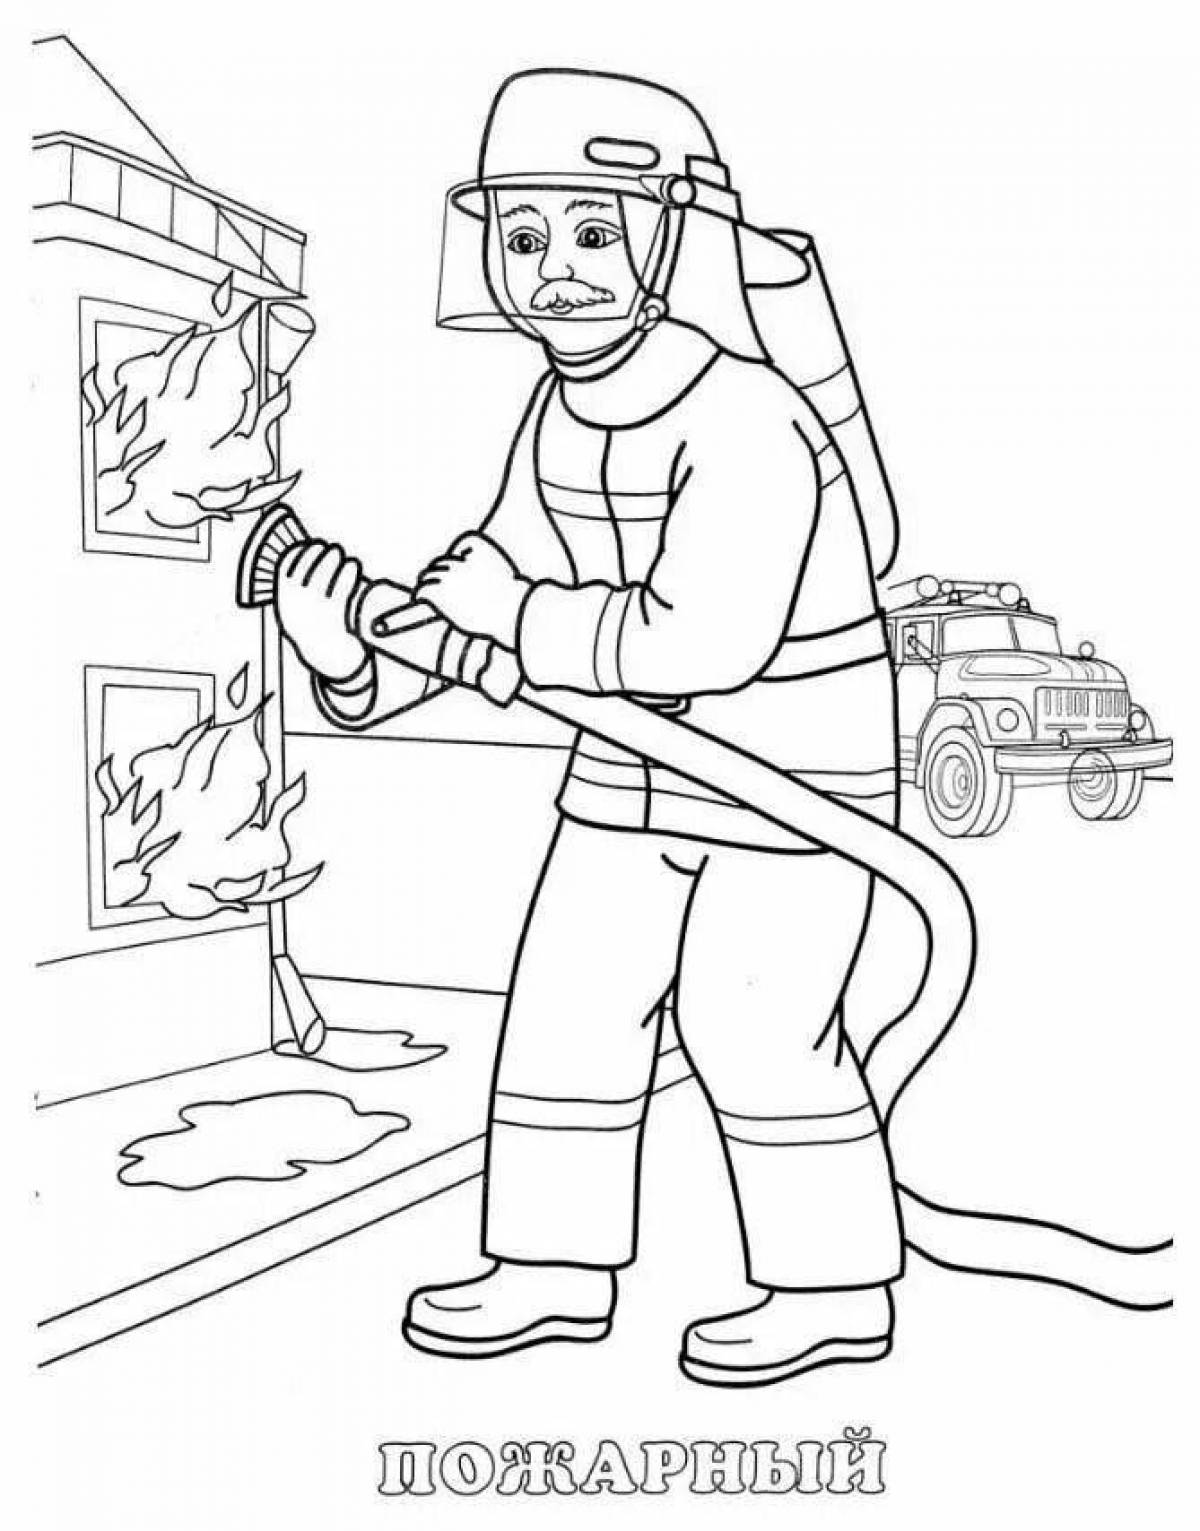 Coloring book dazzling firefighter profession